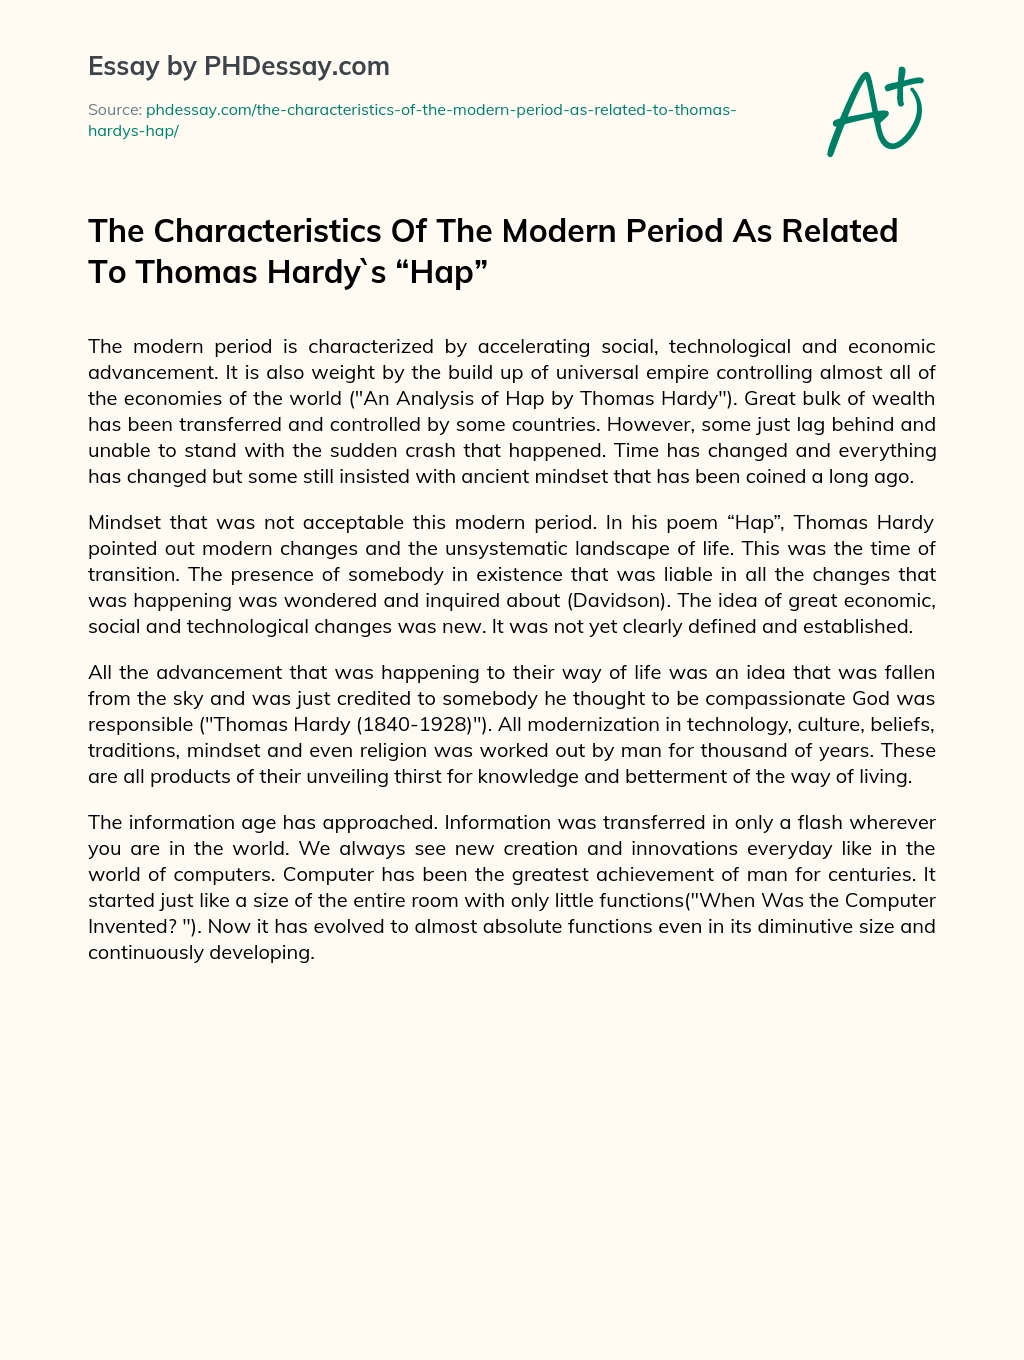 The Characteristics Of The Modern Period As Related To Thomas Hardy`s “Hap” essay